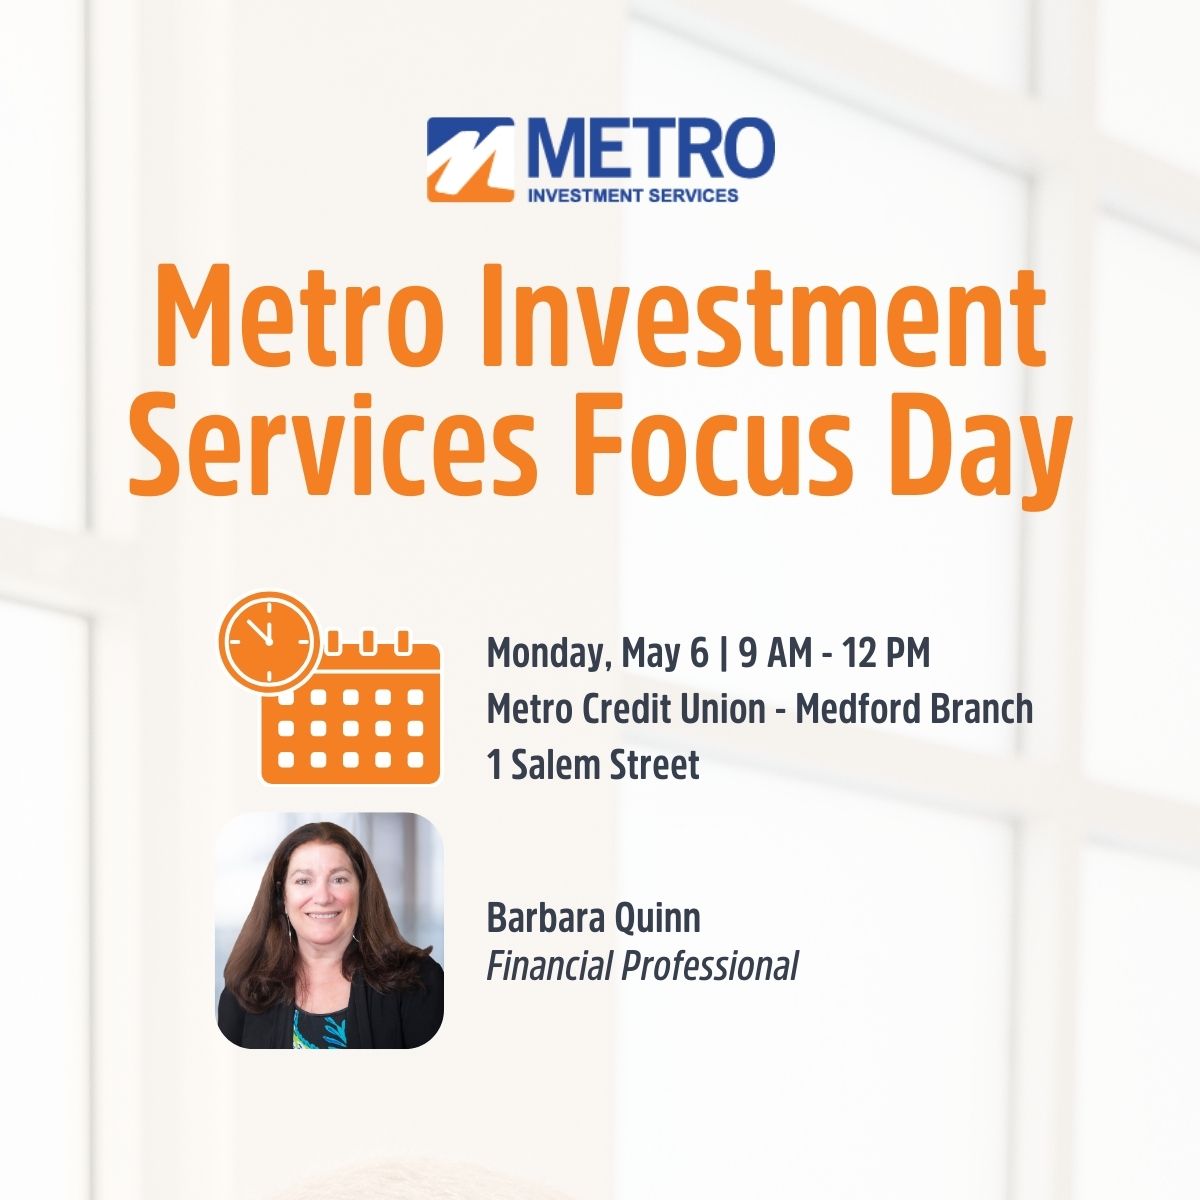 Do you have questions about #investing? Not sure where to begin? Metro Investment Services can help. Stop by our Medford branch on Mon., 5/6, to get all your questions answered. More info on events and #seminars here: ow.ly/QFiJ50RtGjA #financialservices #creditunions